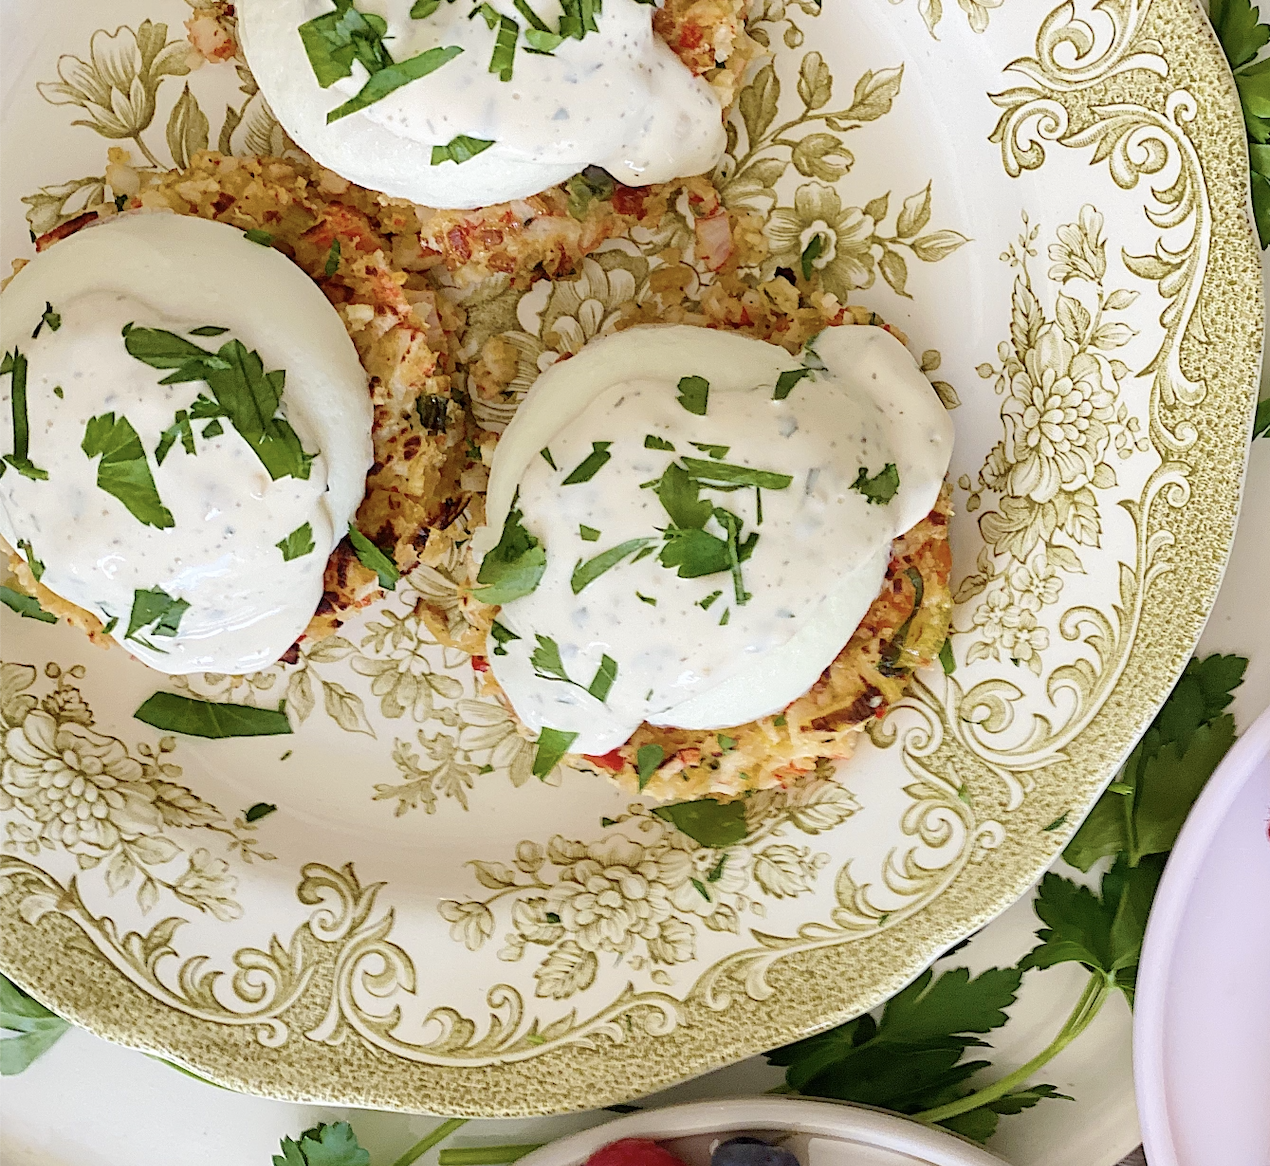 Crab Cakes with Poached Eggs